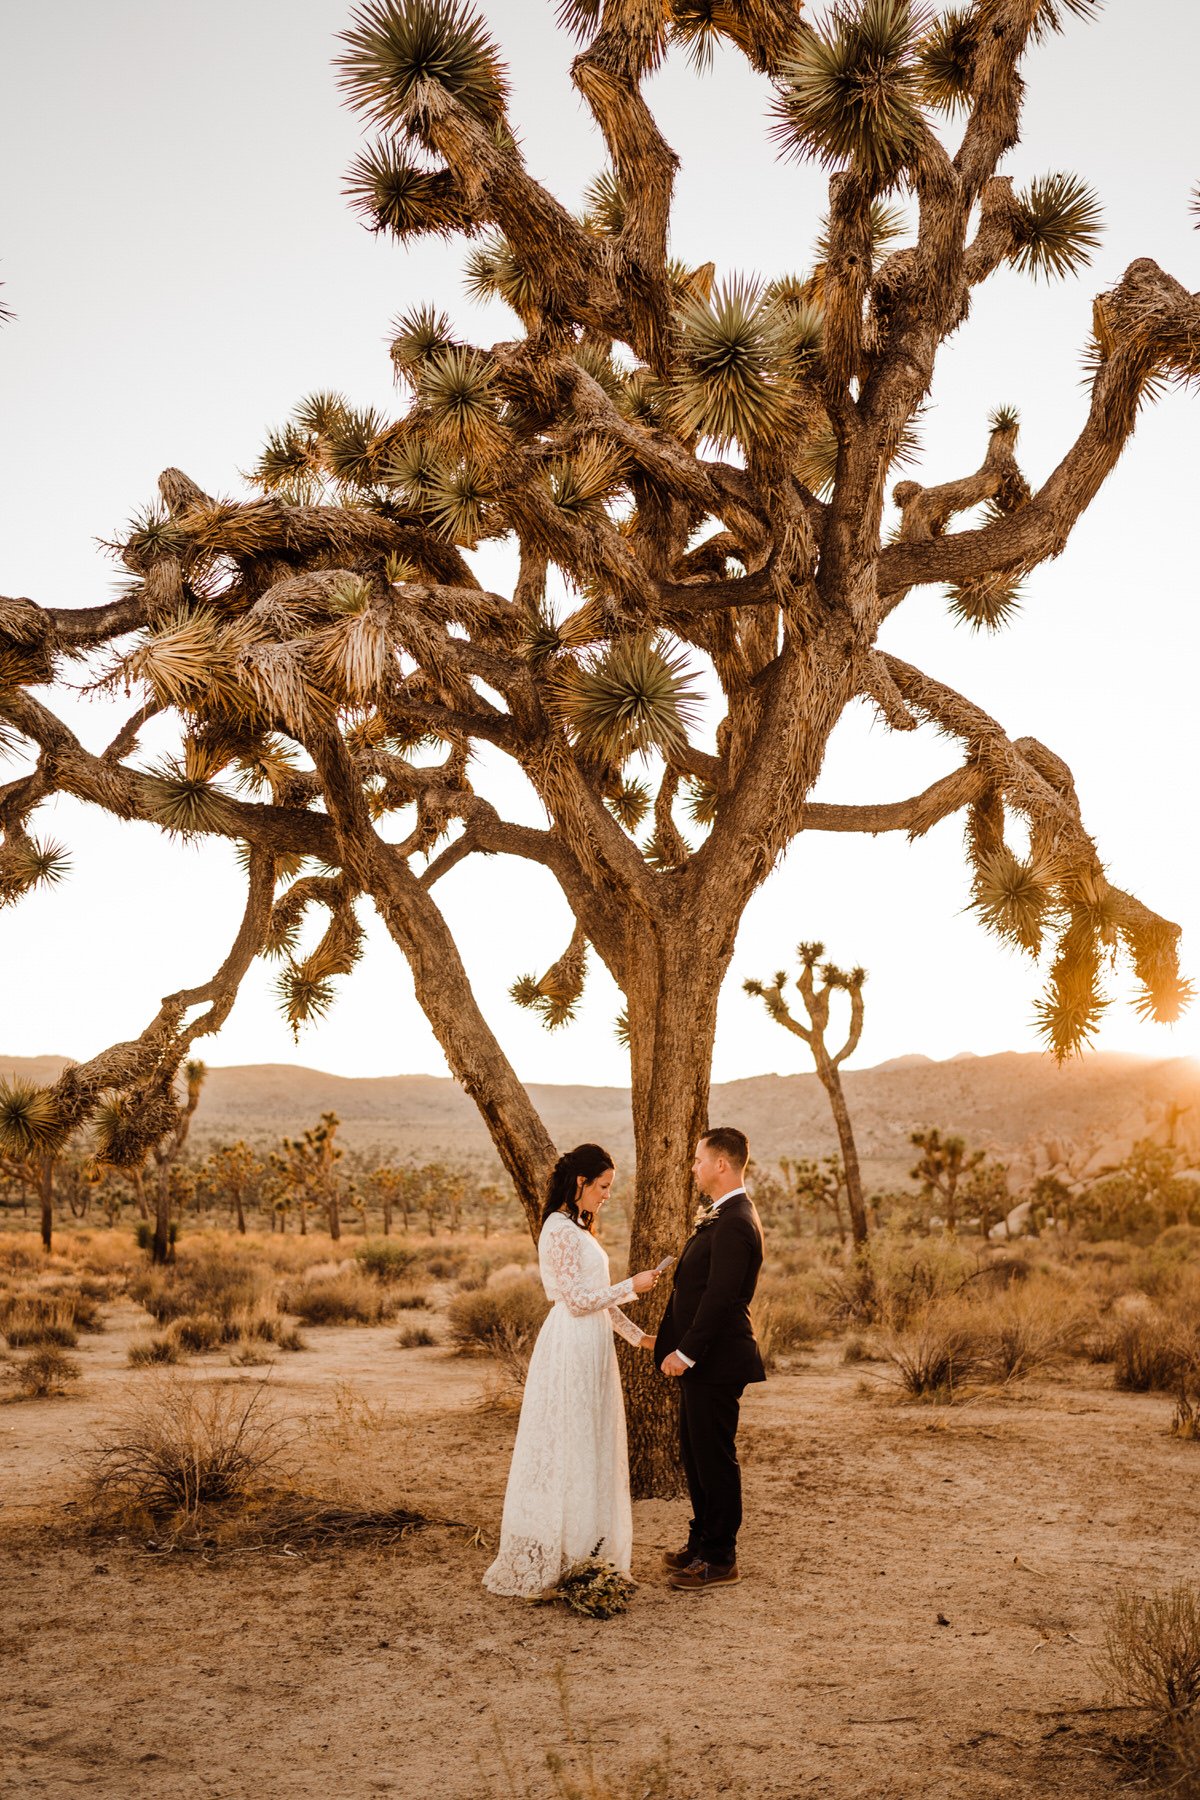 Private-Wedding-Ceremony-at-Joshua-Tree-National-Park-with-New-York-Couple-in-Hiking-boots-during-golden-hour.jpg